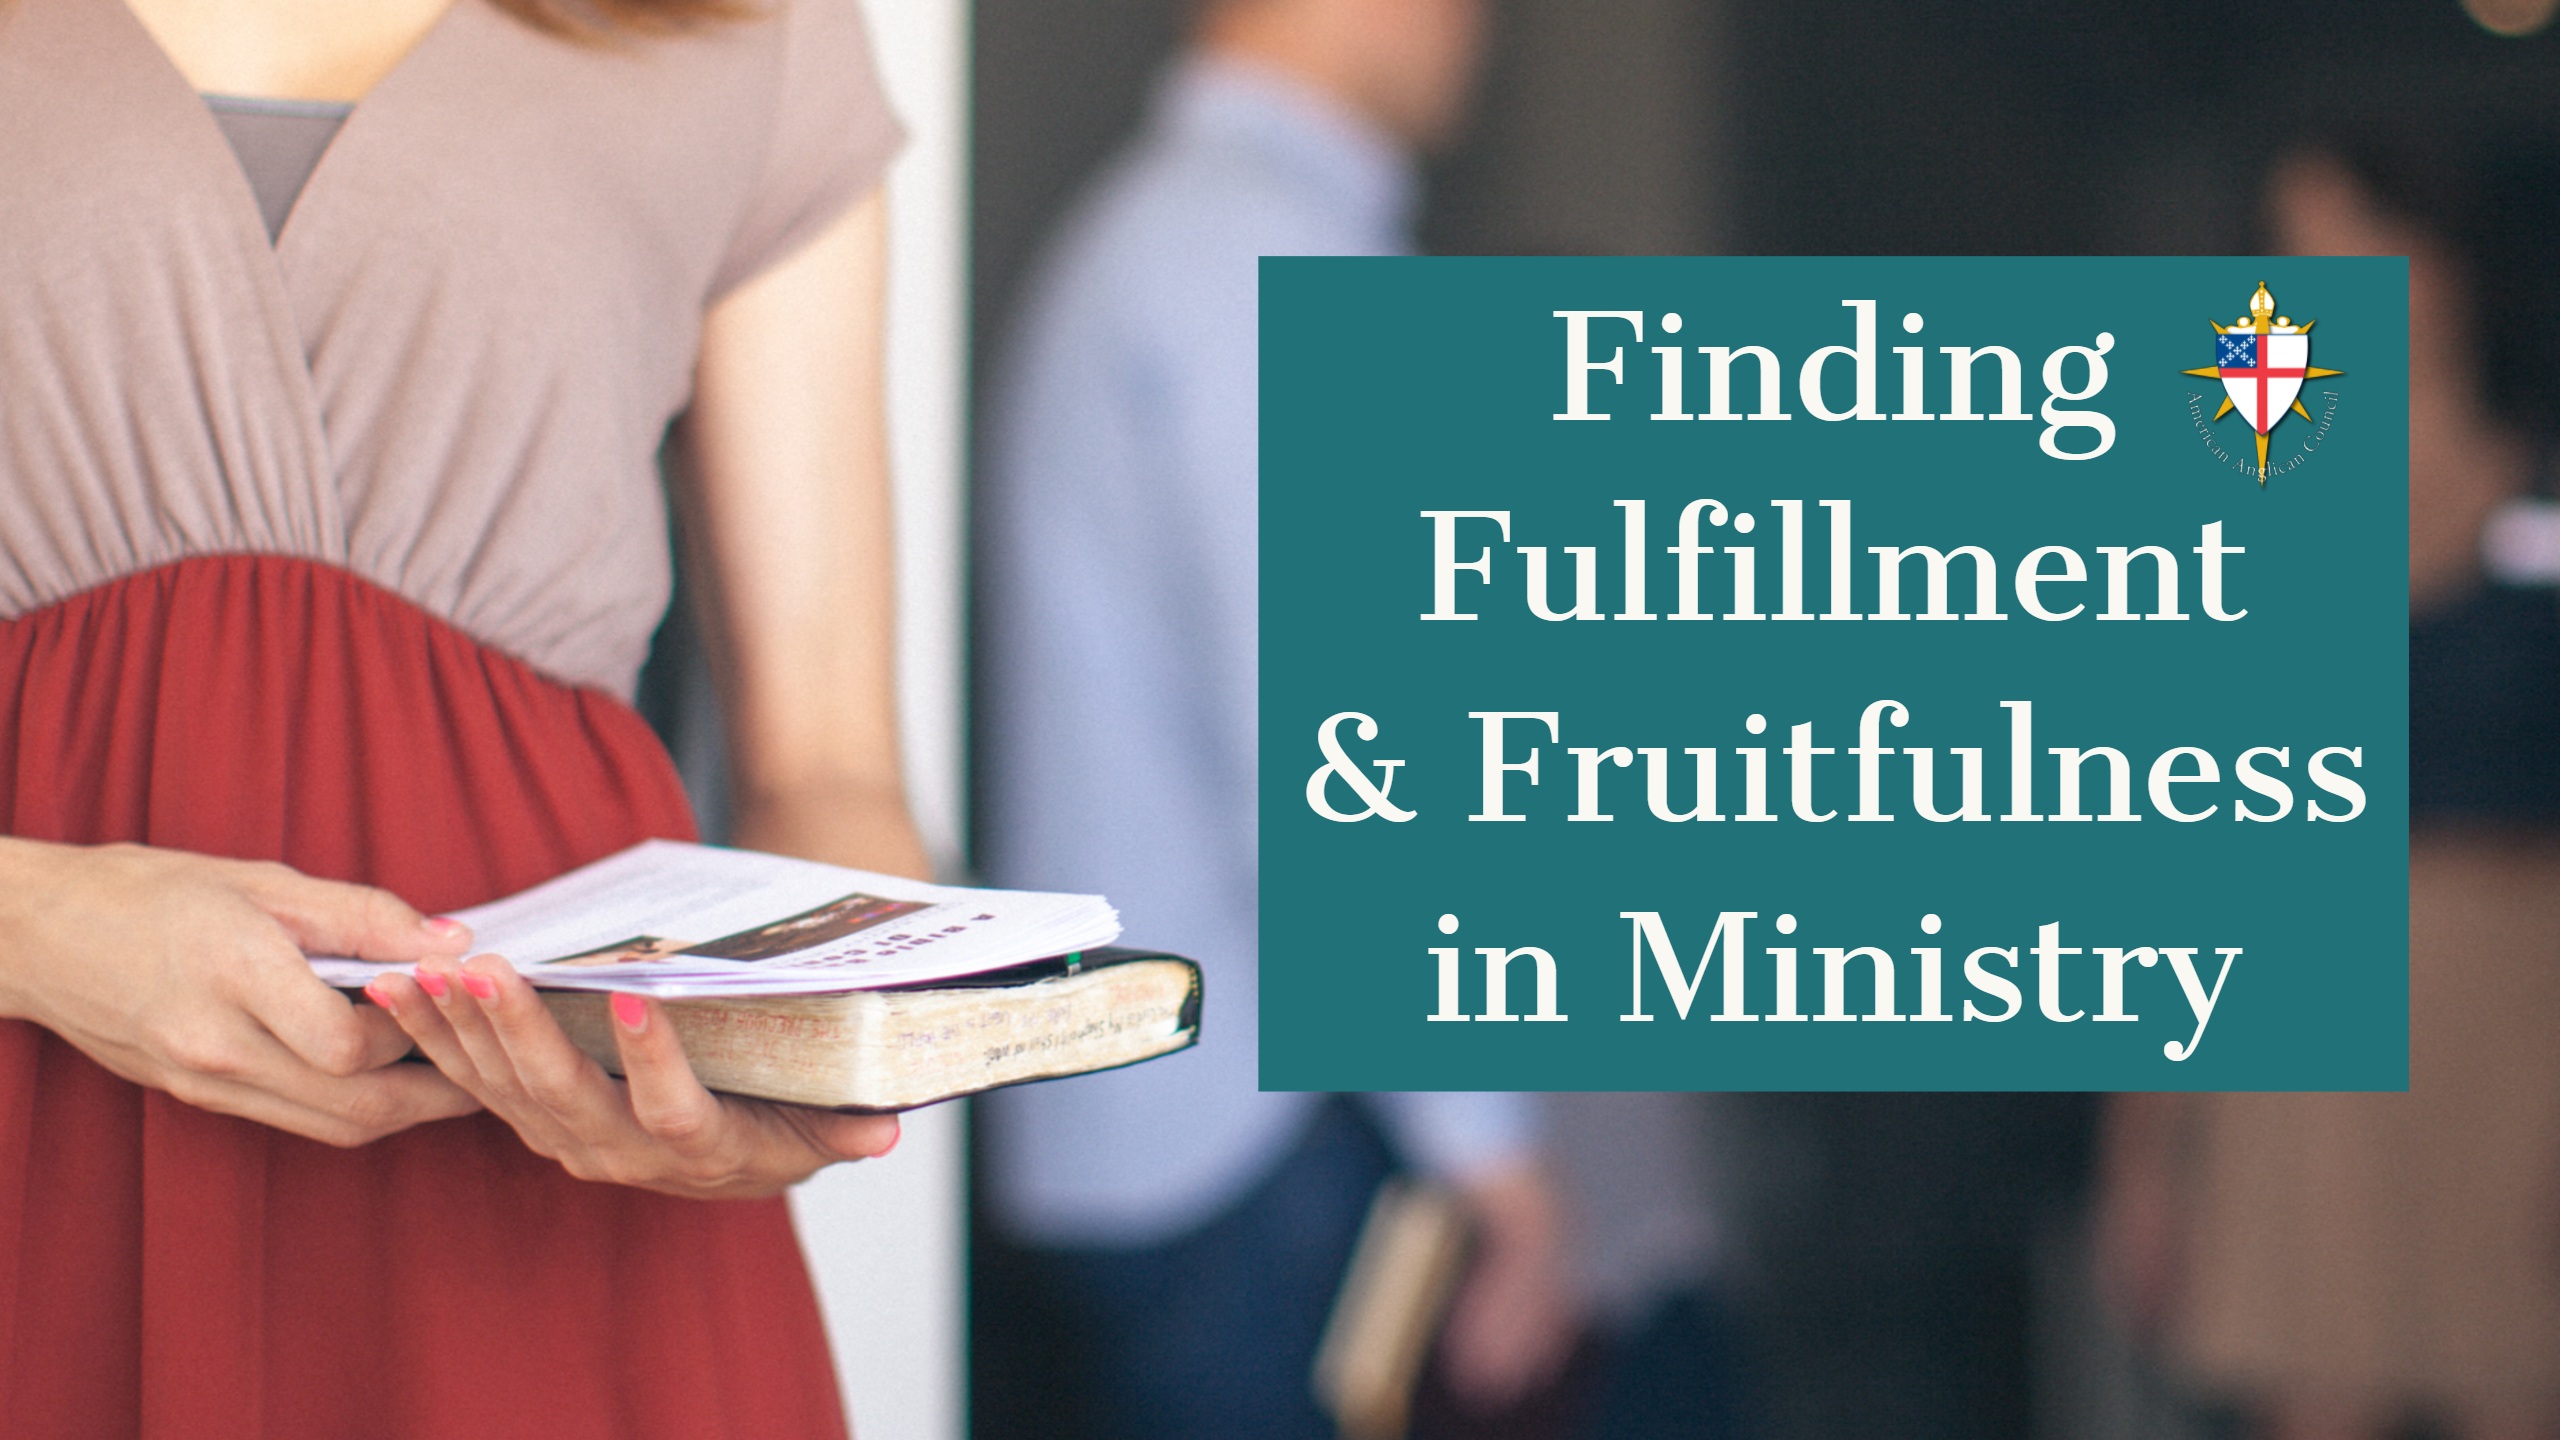 Finding Fulfillment & Fruitfulness in Ministry